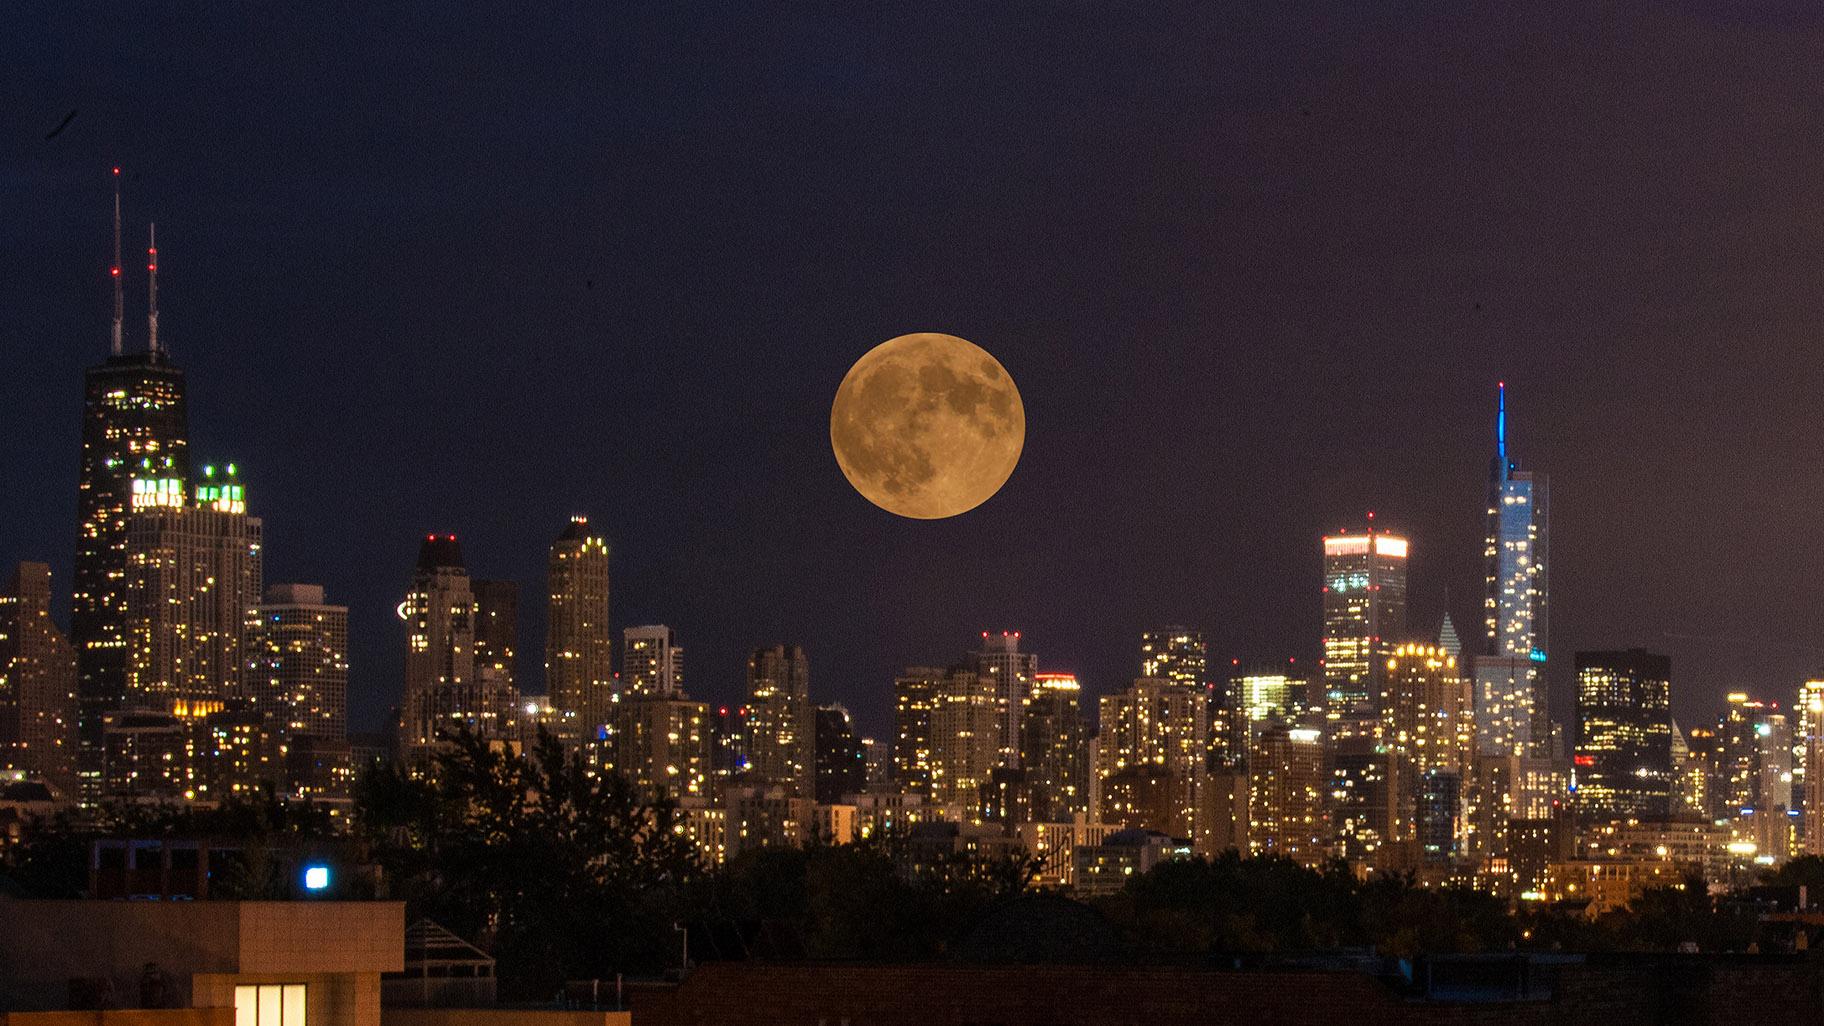 “Chicago Tonight” viewer J. Scott Sykora shared this photo of a harvest supermoon eclipse on Sept. 27, 2015.